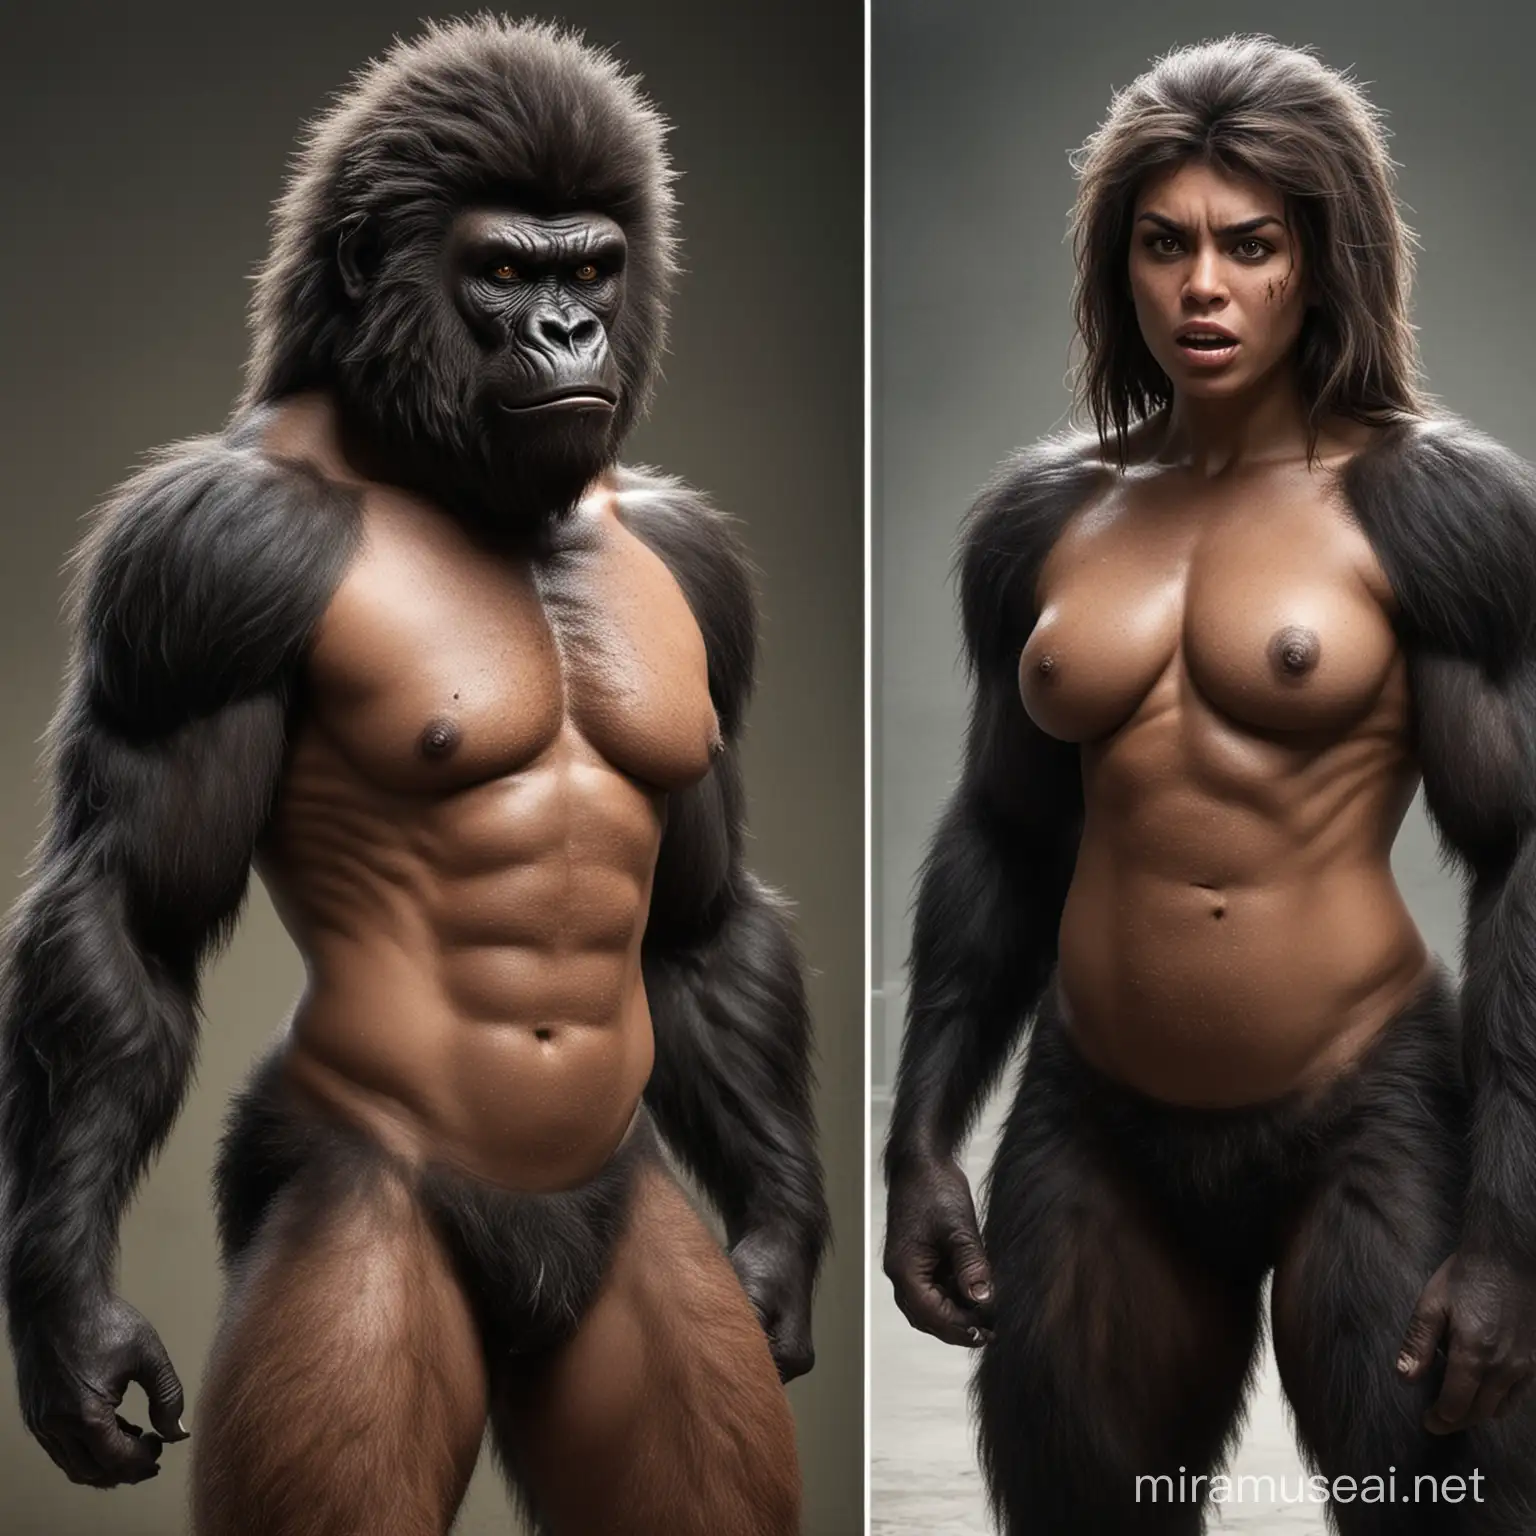 Transformation into a Weregorilla Illustration of a Hairy Woman Morphing into a Primal Beast